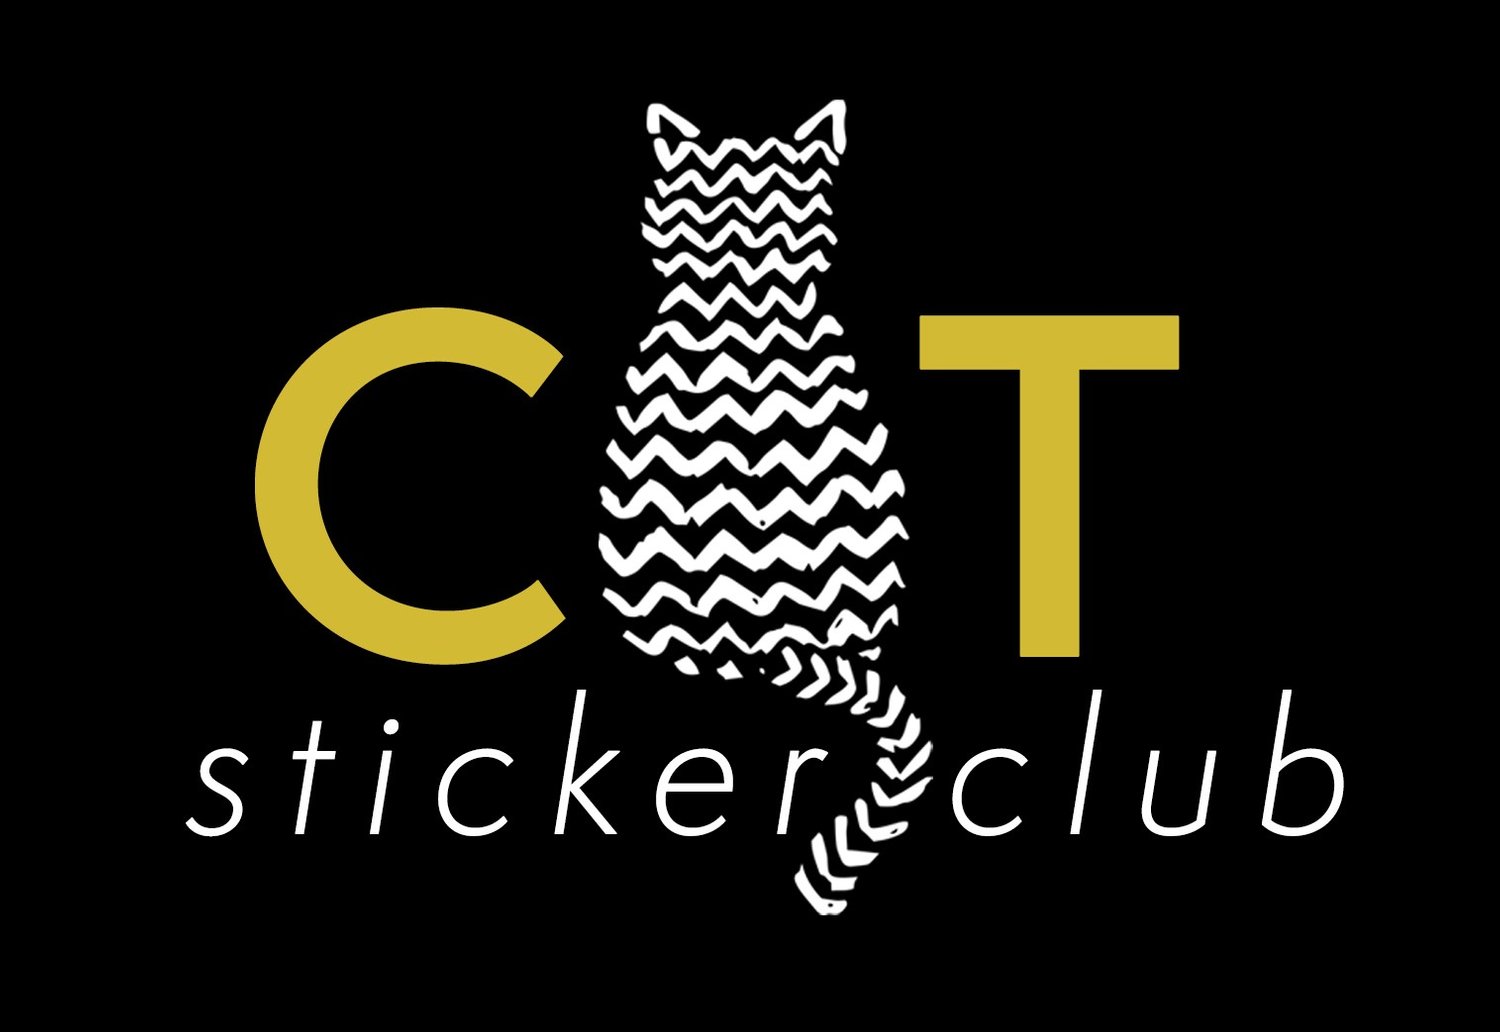 Cat Sticker Club - Join for cute cat stickers!